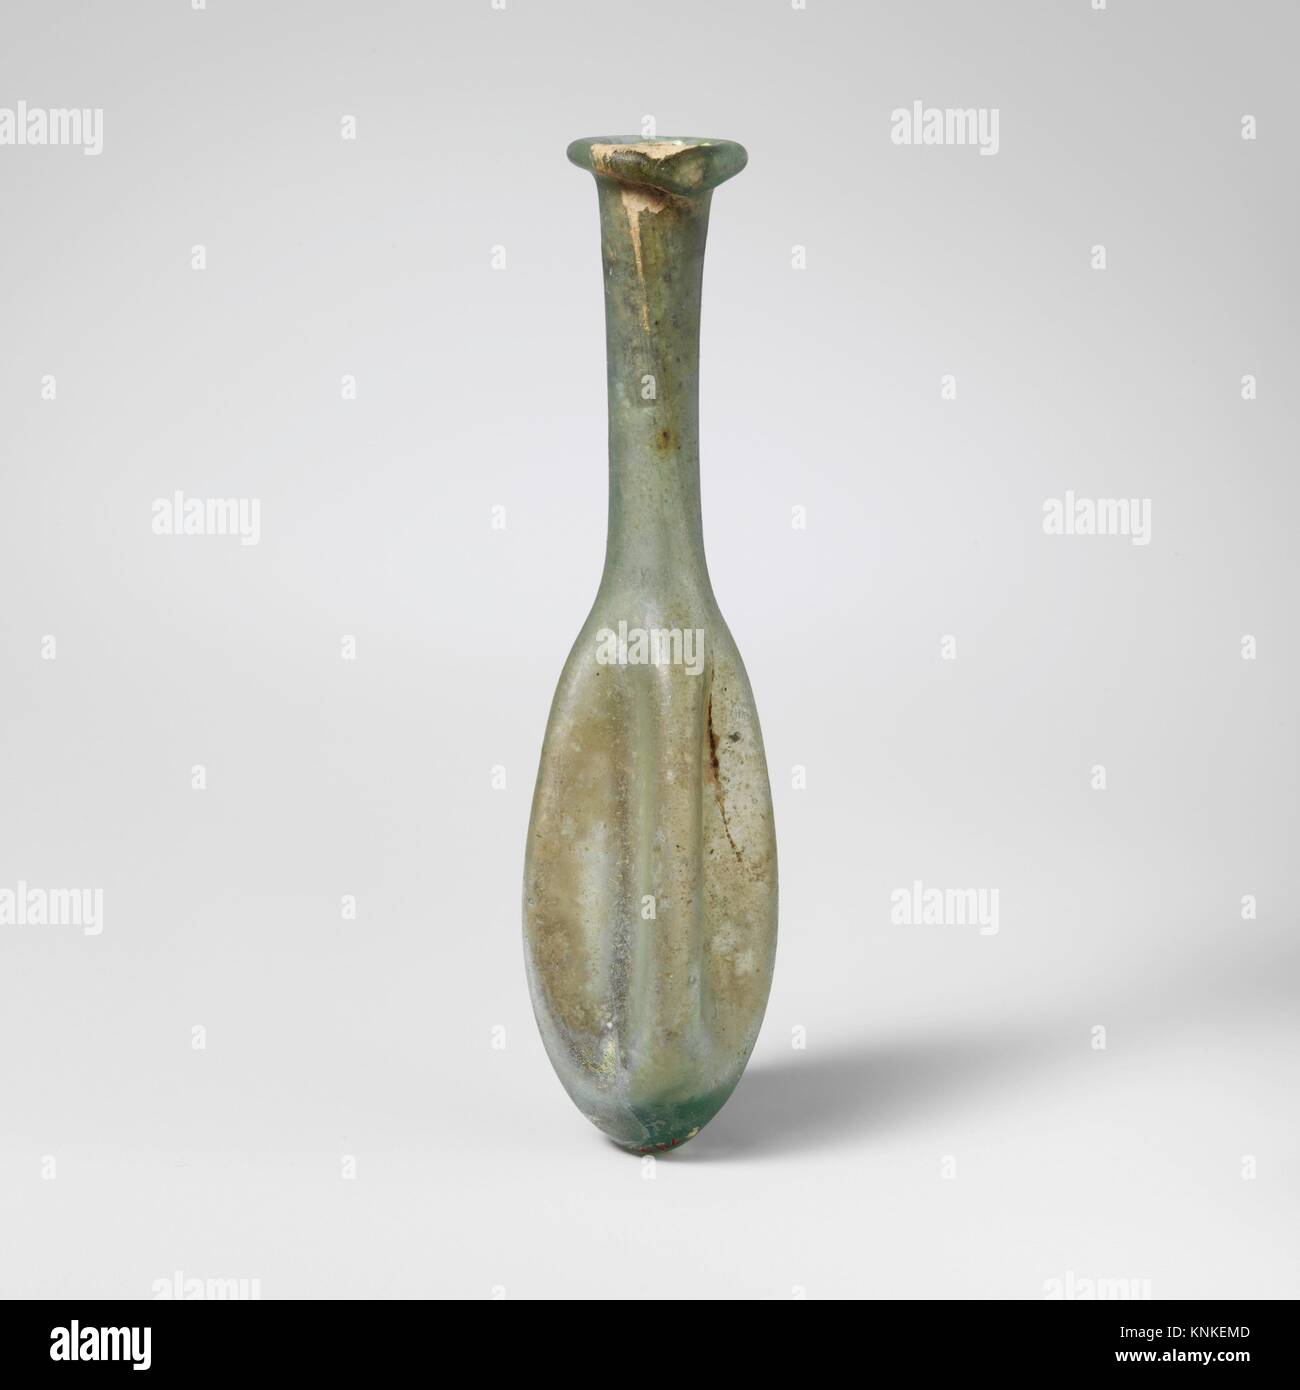 Glass perfume bottle. Period: Mid Imperial; Date: 2nd-3rd century A.D; Culture: Roman; Medium: Glass; blown; Dimensions: 4 5/8 x 7/8in. (11.7 x Stock Photo